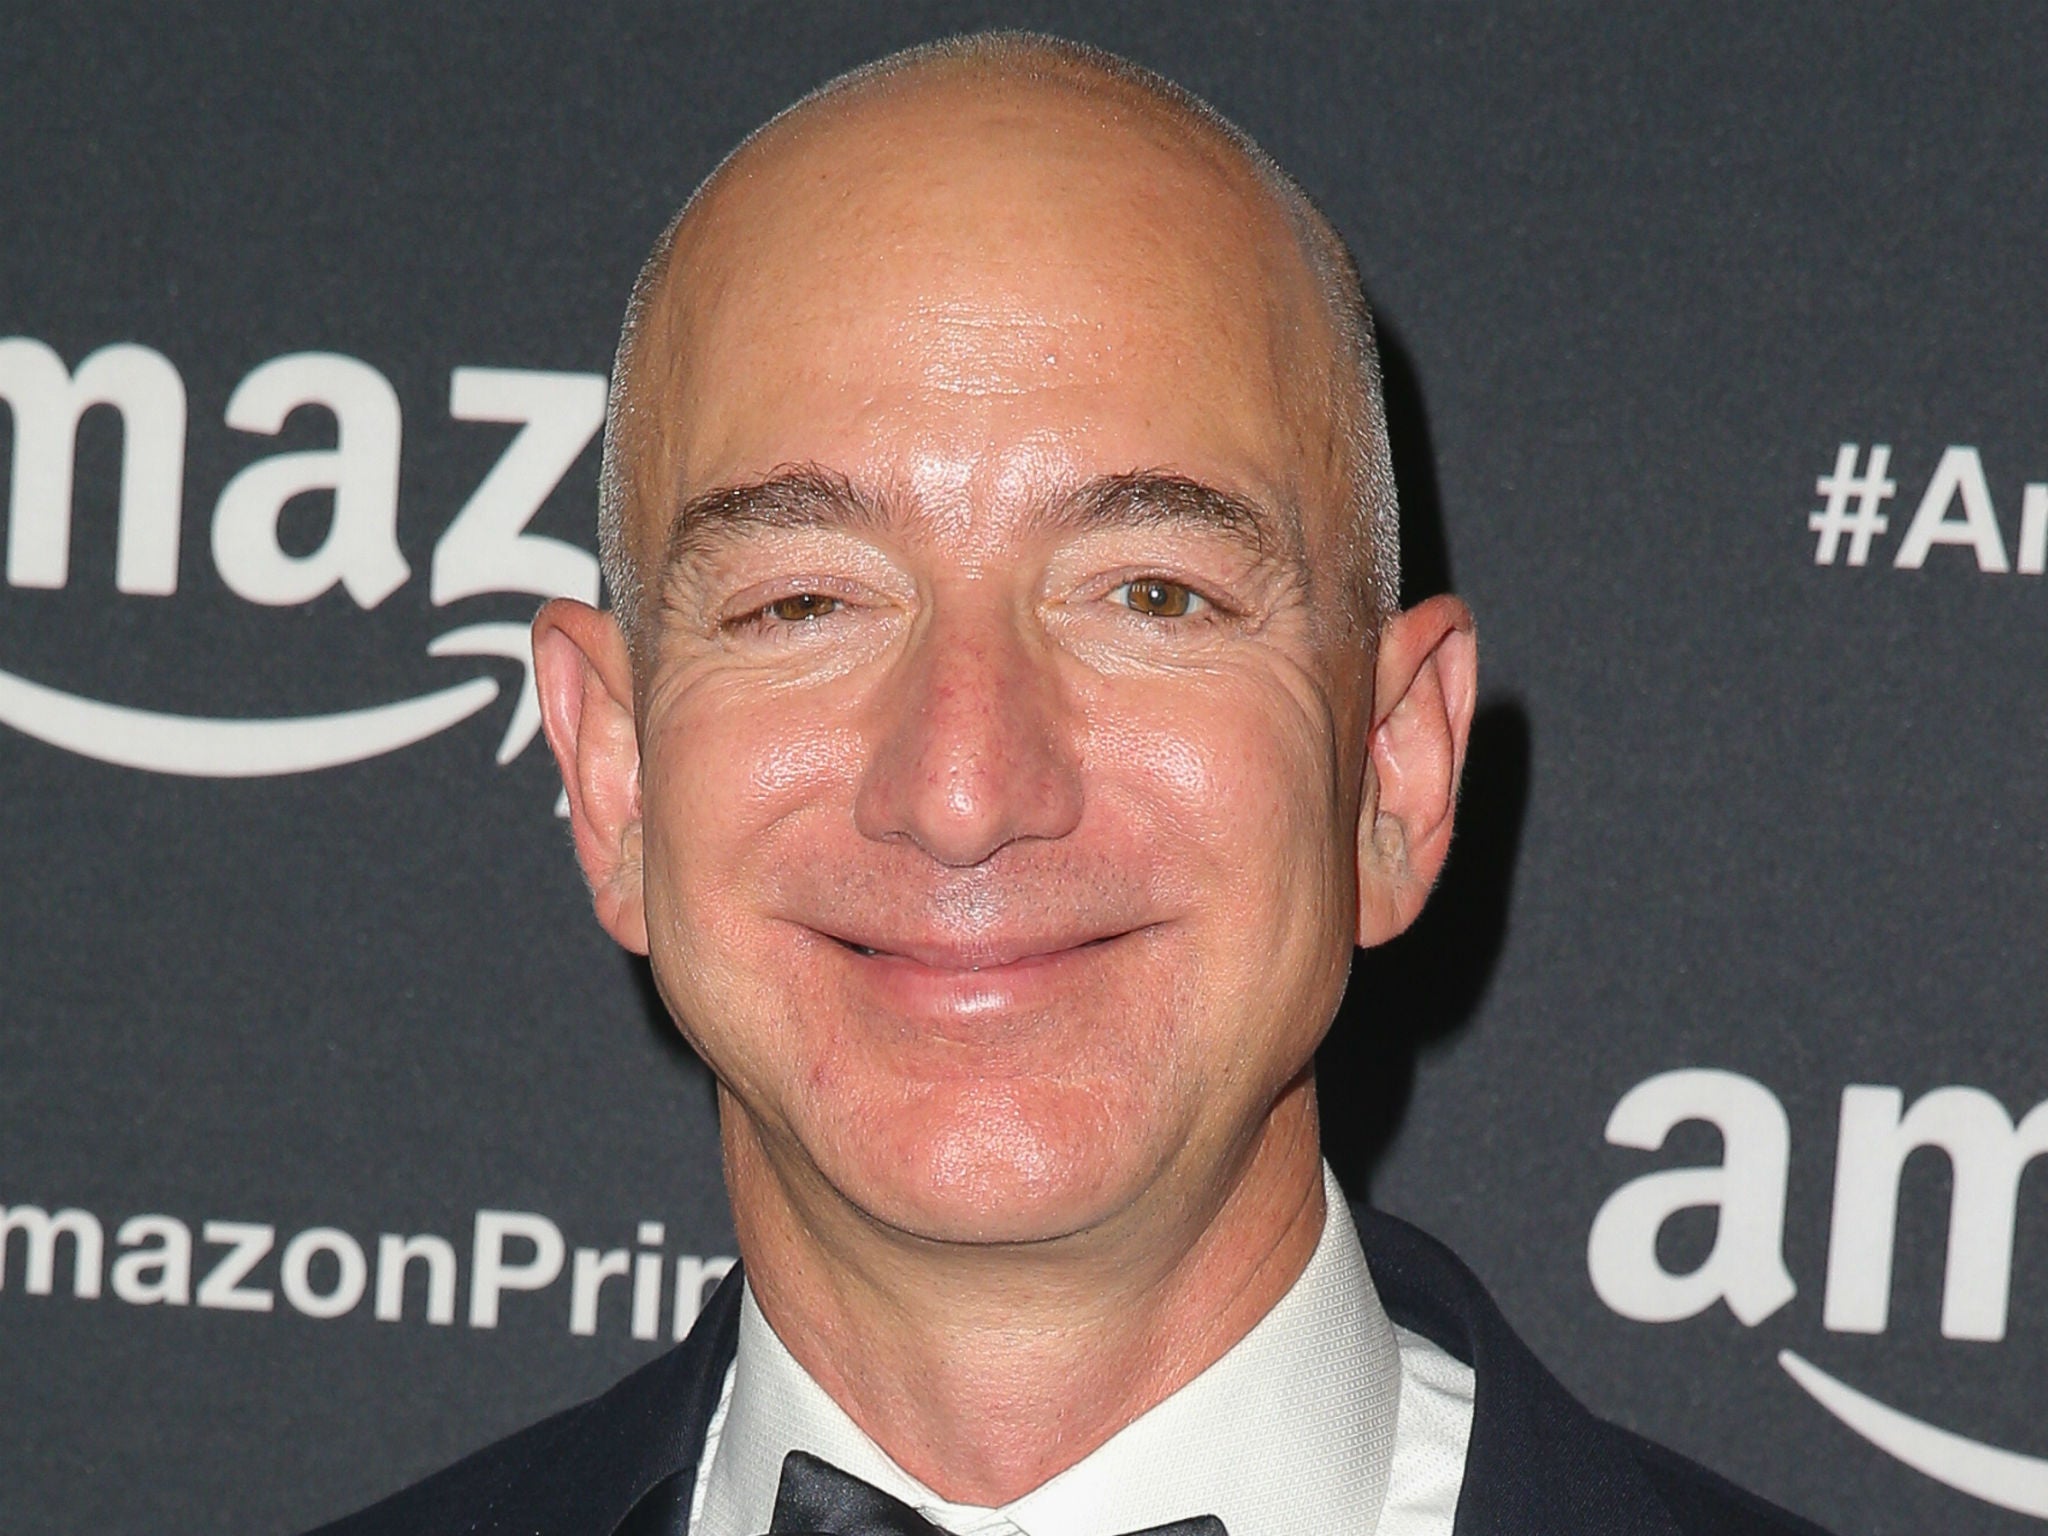 Mr Bezos offered to book the Republican candidate a seat on the Blue Origin